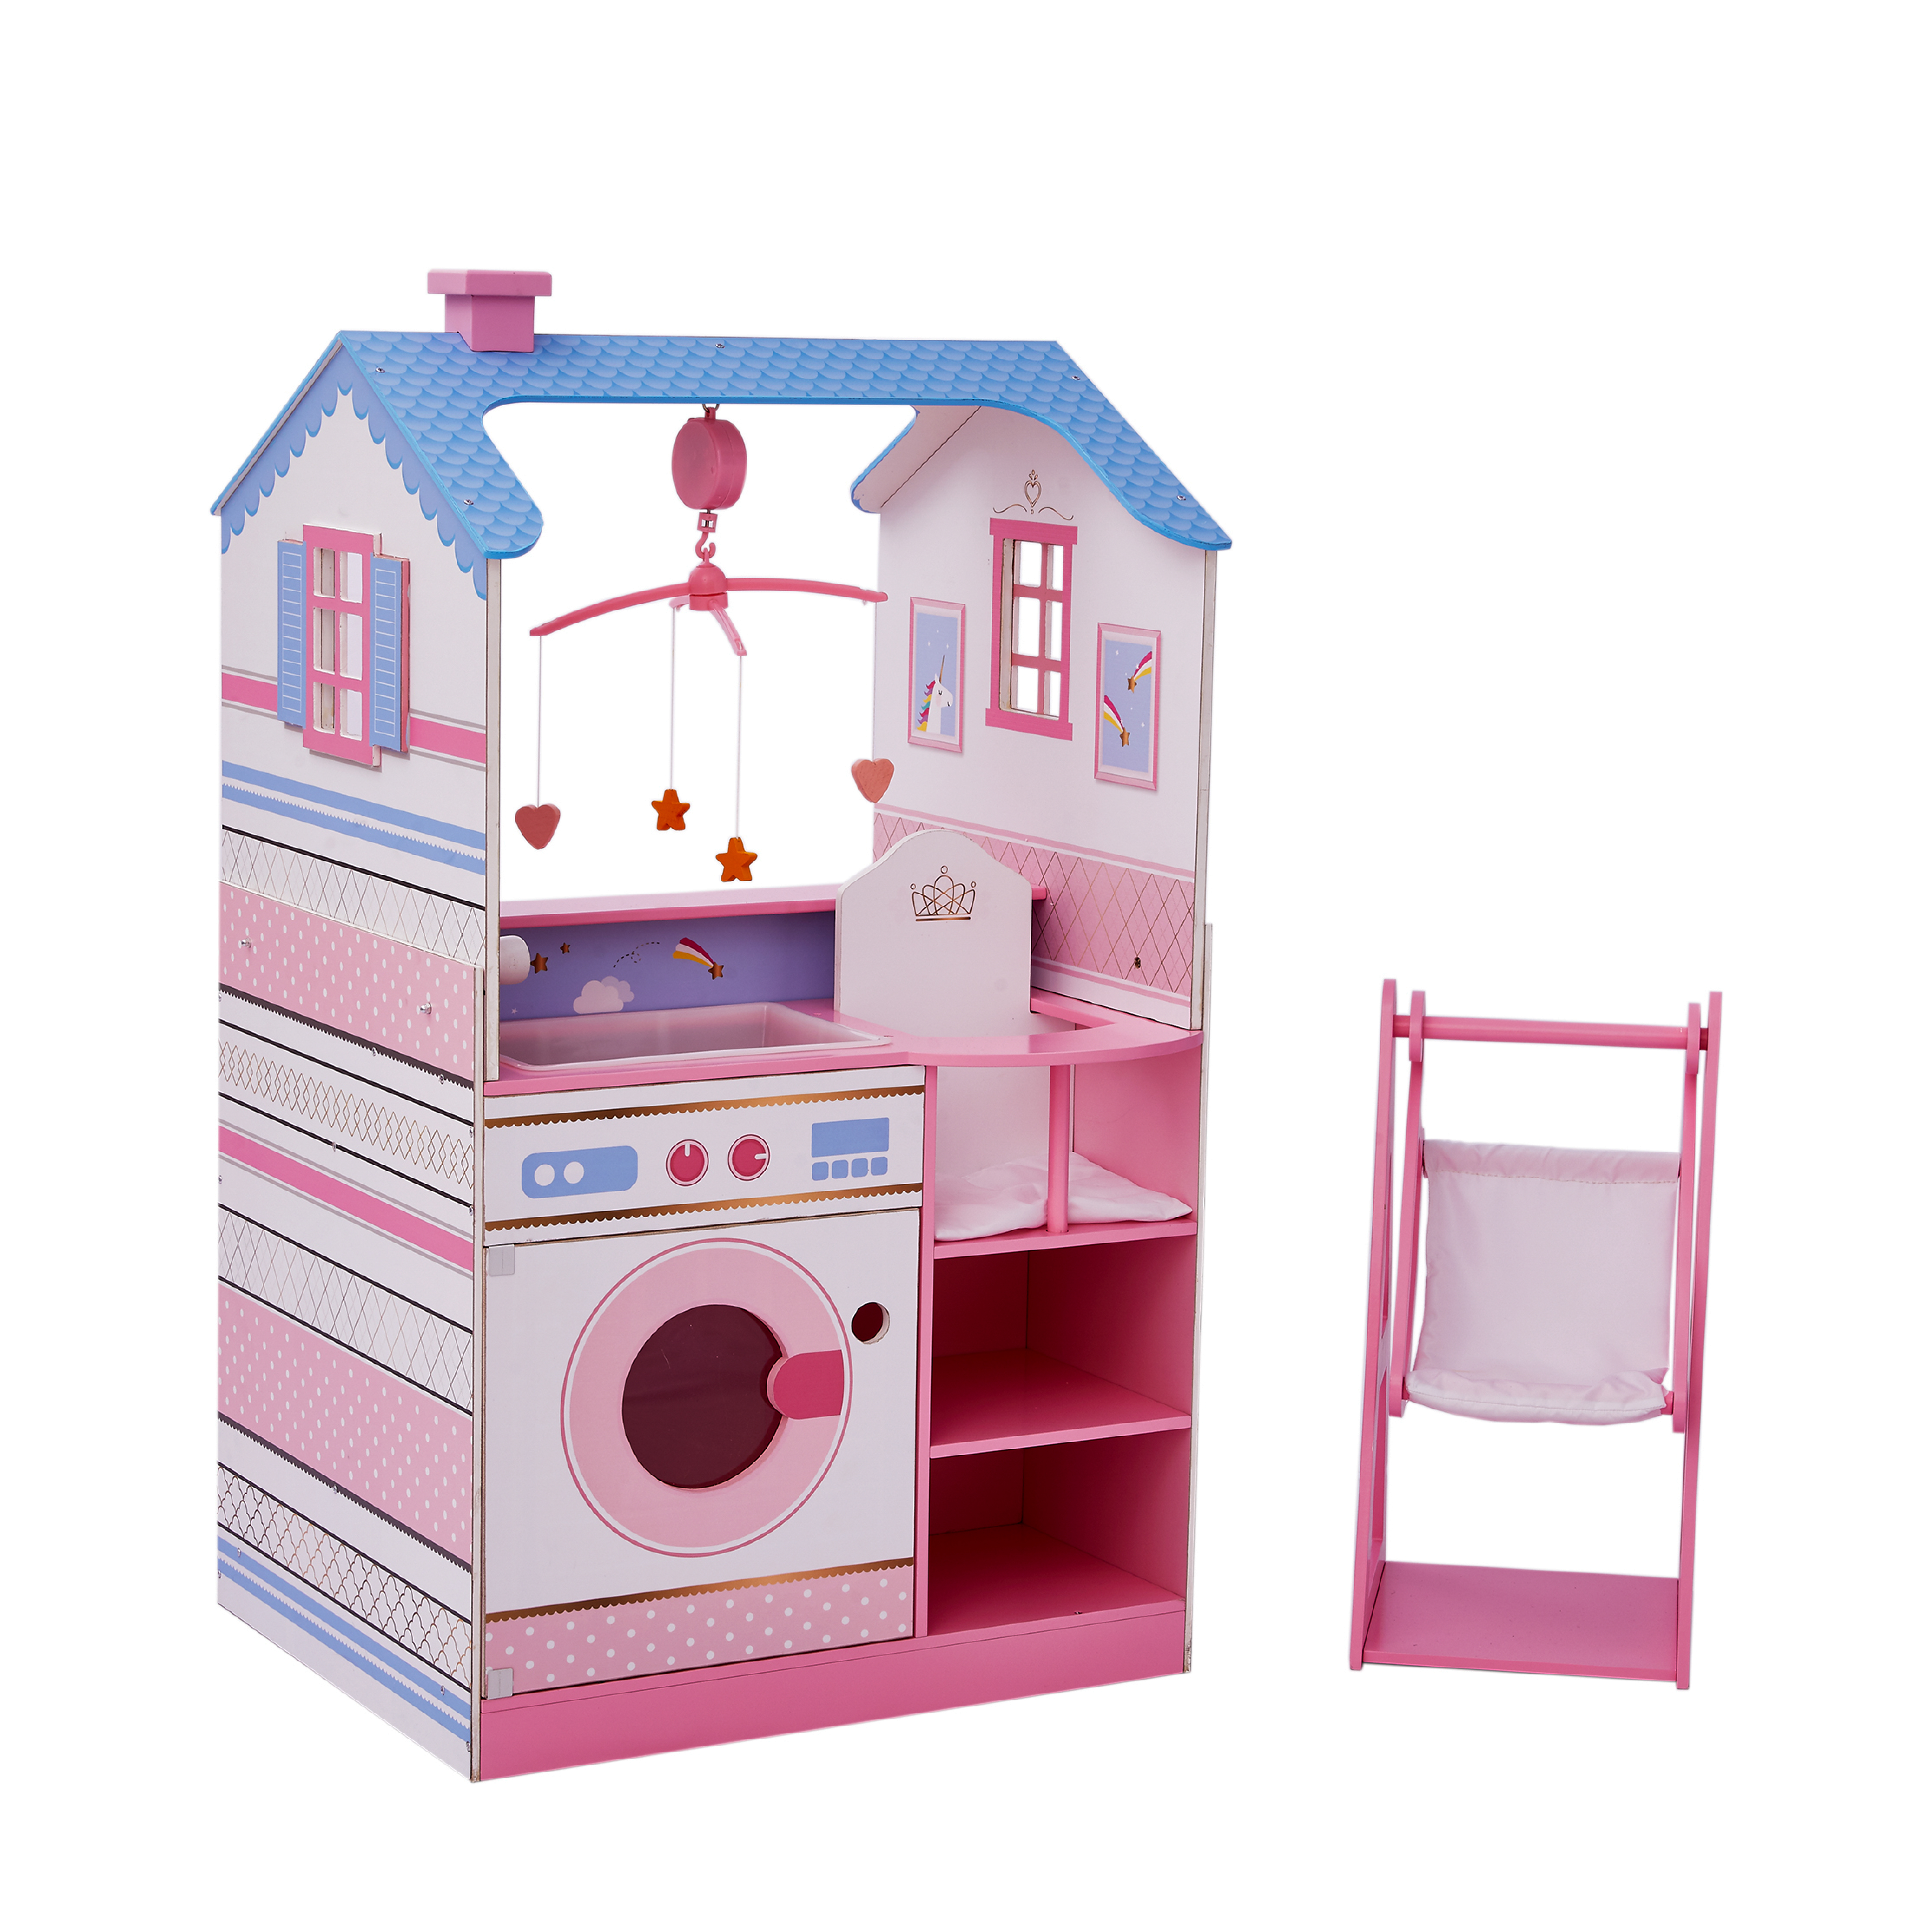 Olivia´s Little World Dollhouse Changing Table Nursery Playset Station TD-11460W